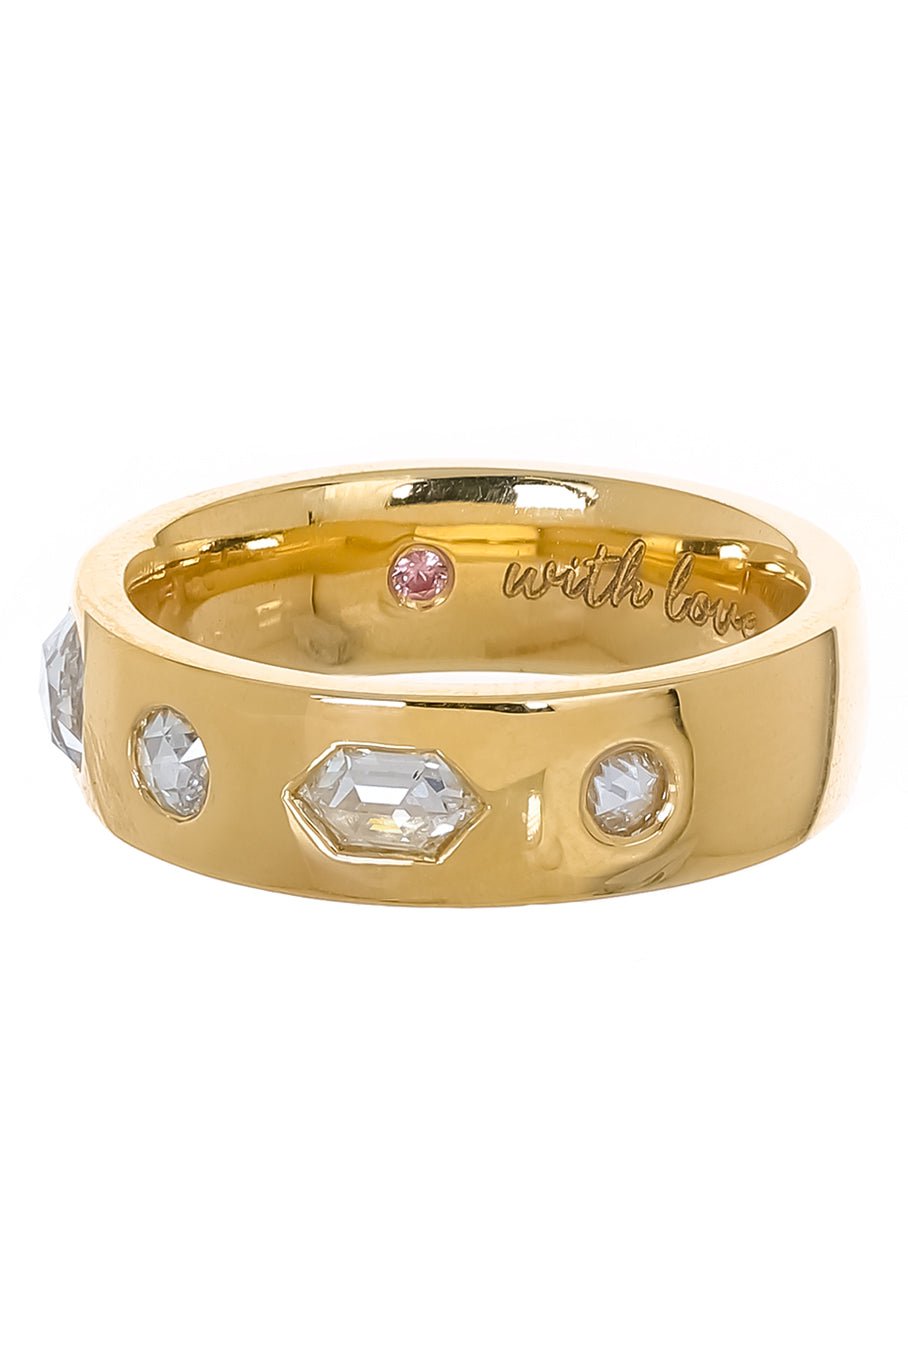 WITH LOVE-Rose Cut Diamond Ring-YELLOW GOLD